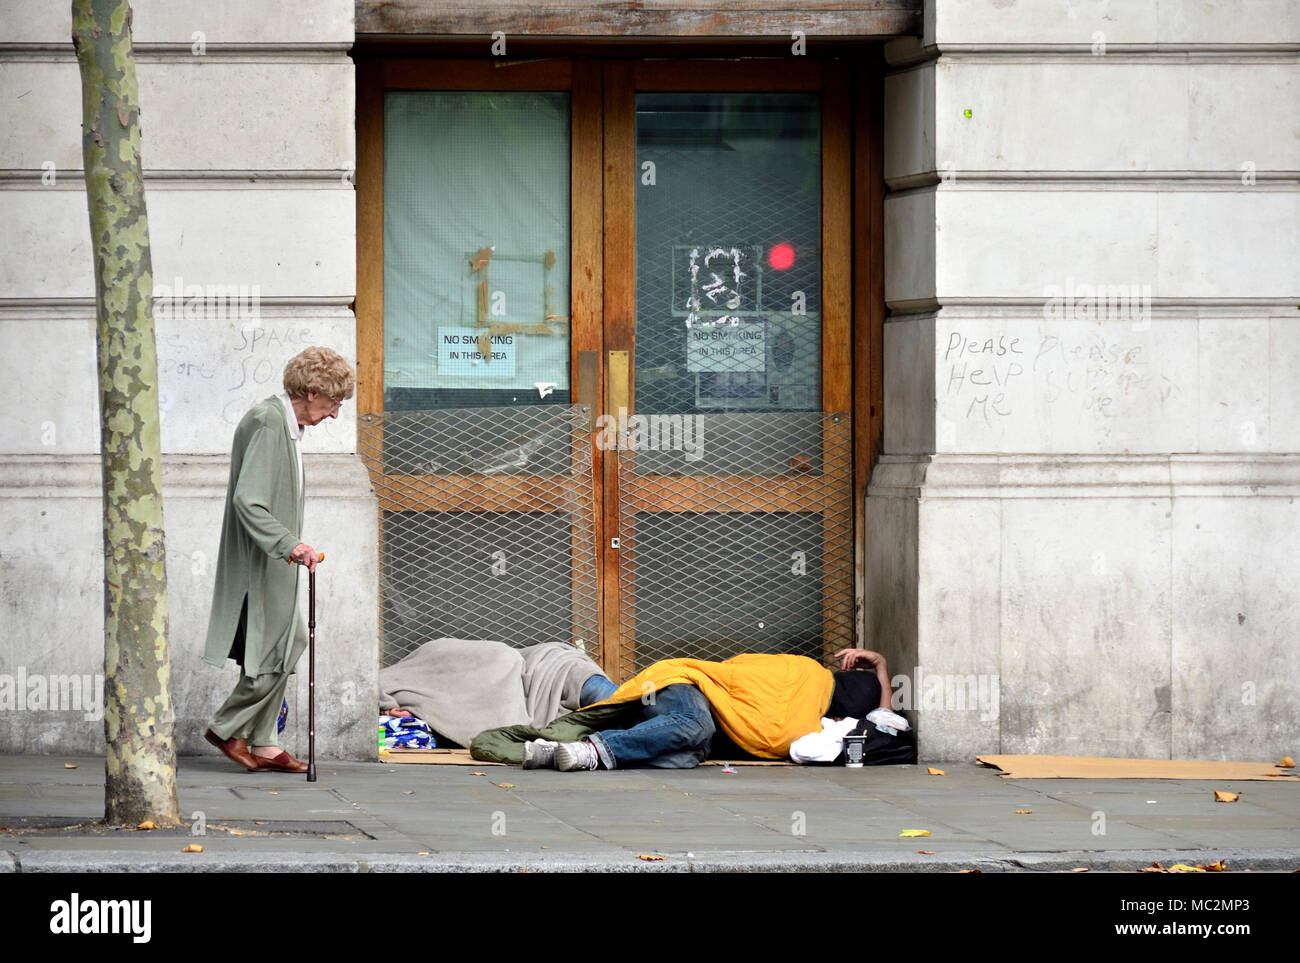 London, England, UK. Two homeless people sleeping in a doorway in St Martin's Place, near Trafalgar Square Stock Photo